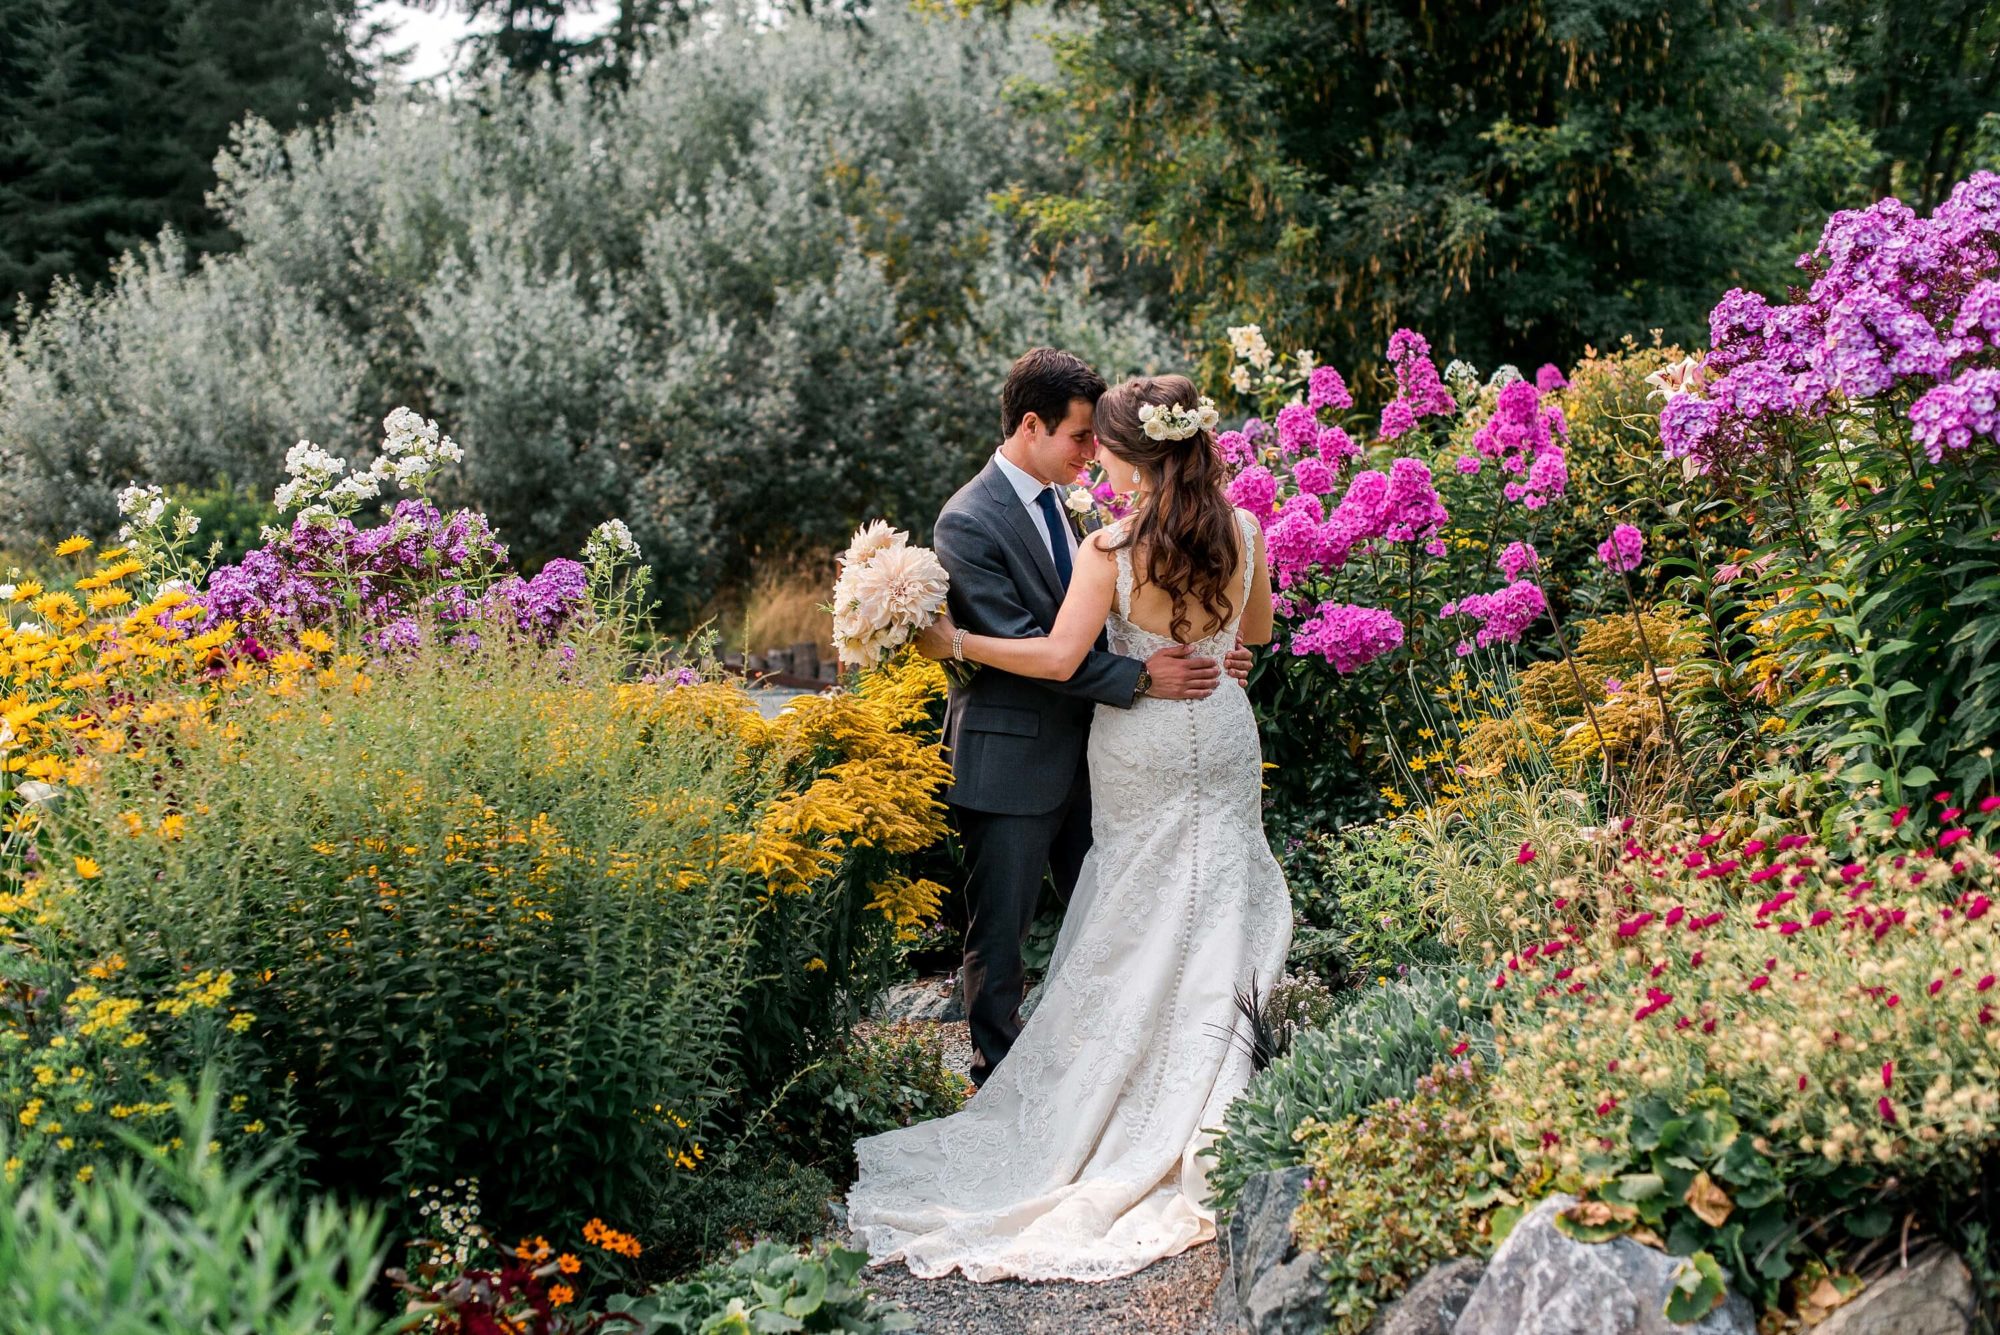 Bride and groom dancing in the flower garden surrounded by flowers at a fireseed catering wedding